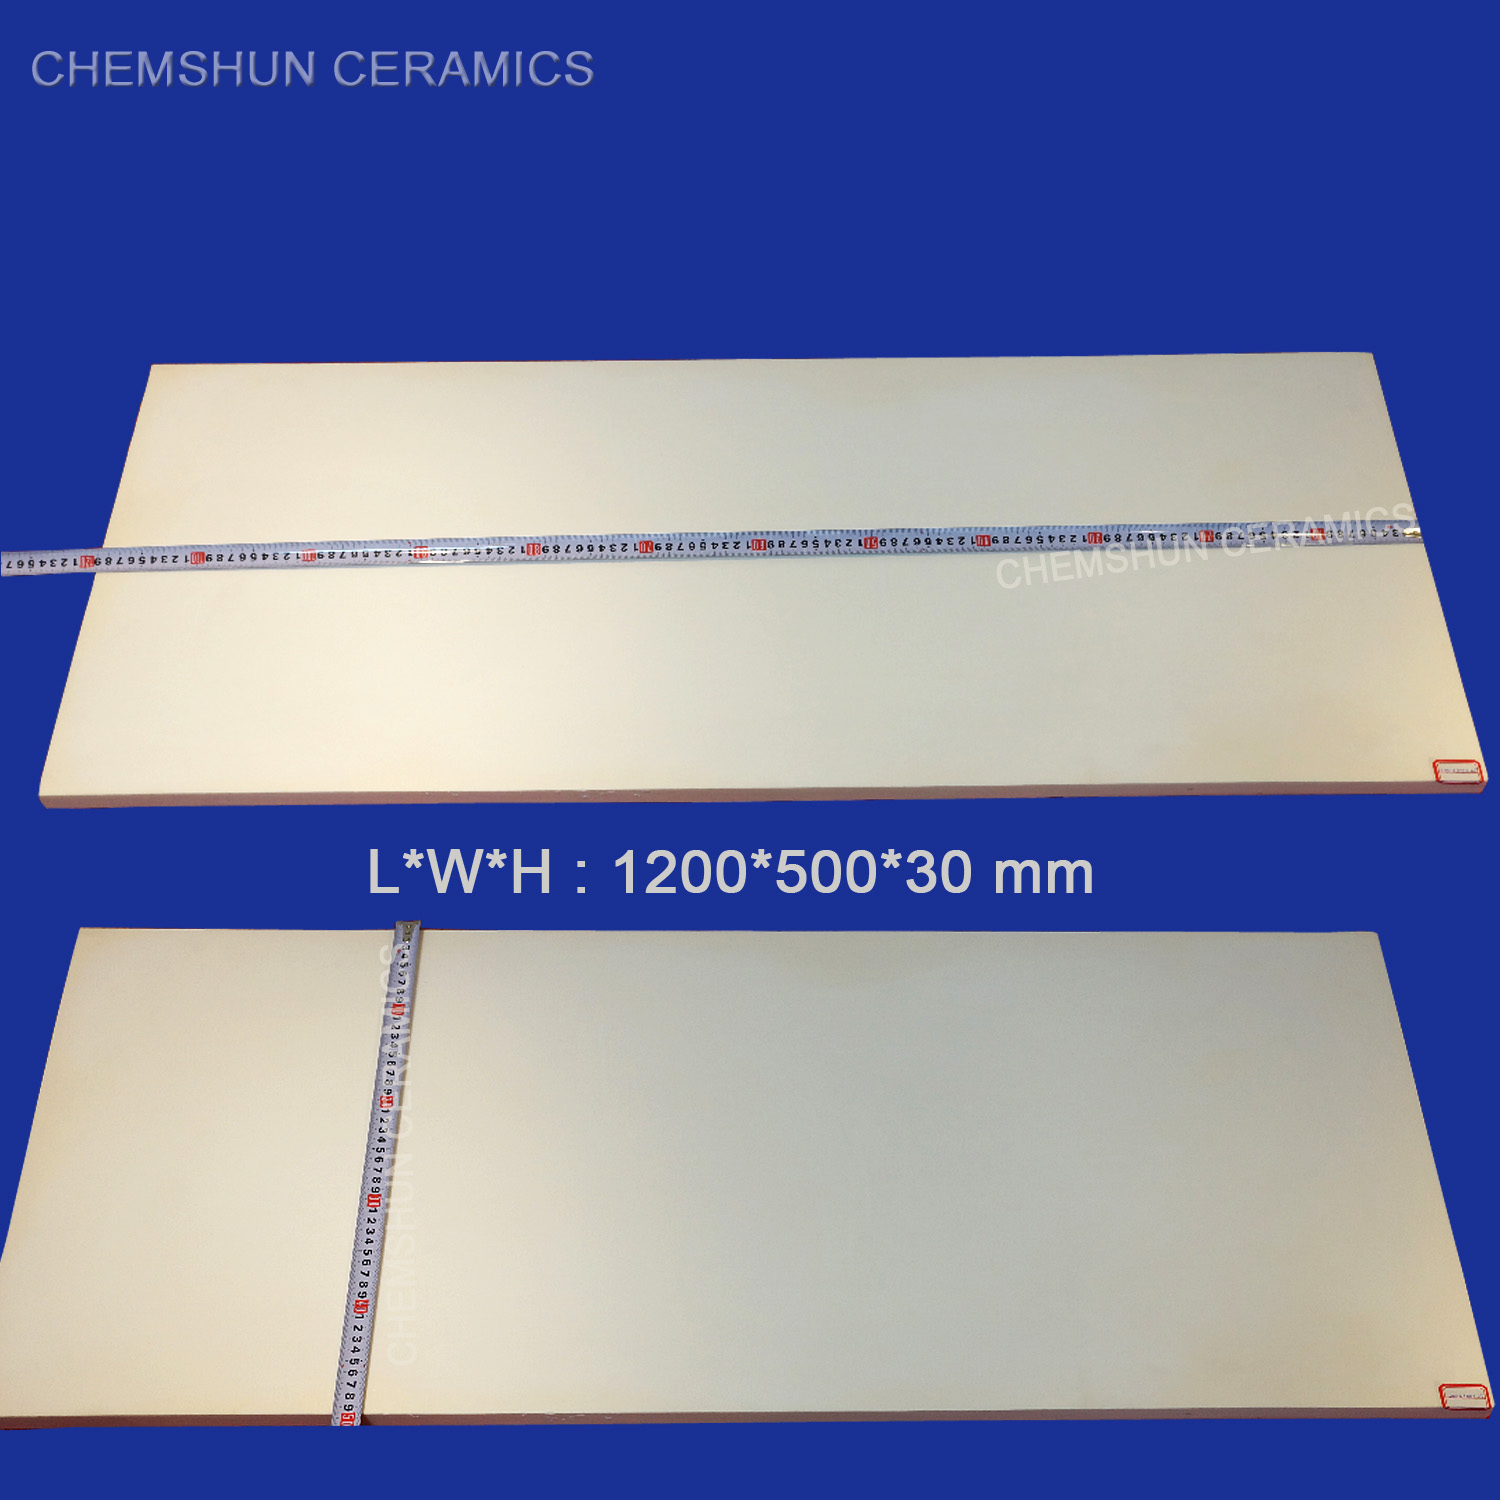 Large Size High Purity Alumina Baseboard for LCD Manufacturing Equipment